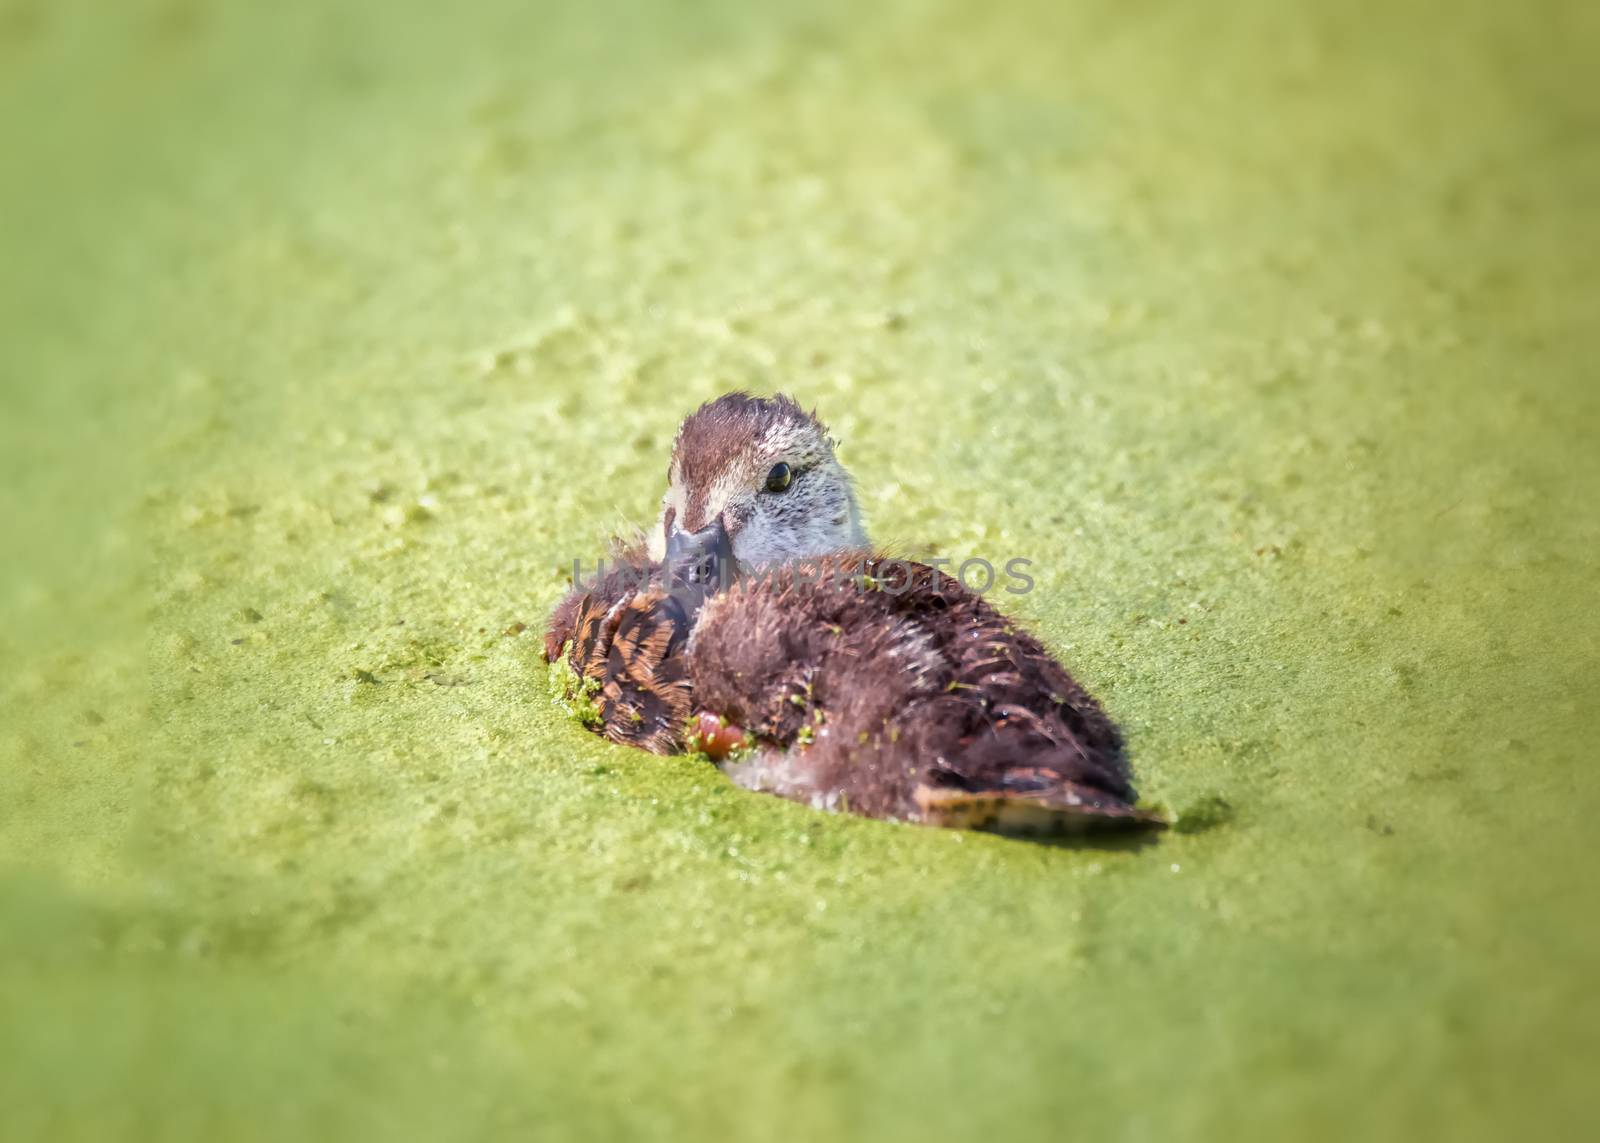 Duckling Floating in Mossy Water by backyard_photography